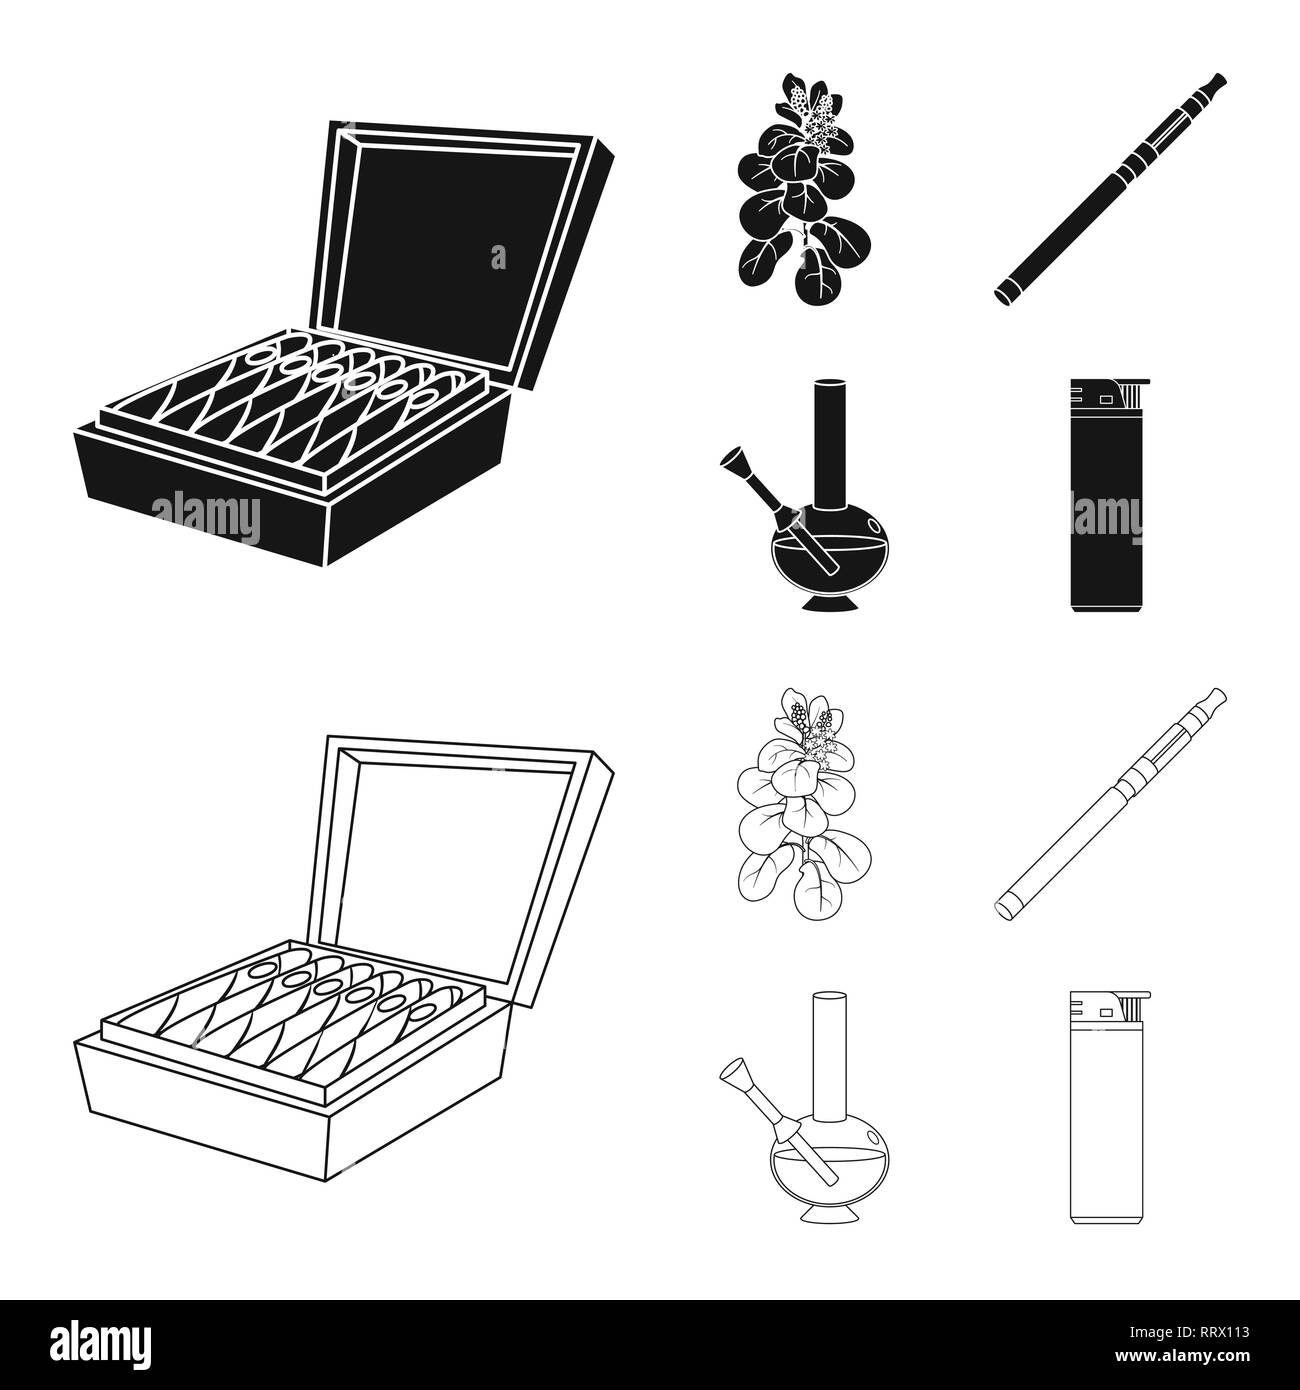 cigar,leaves,electronic,hookah,lighter,box,leaf,filter,bong,plastic,package,agriculture,paper,metal,pack,botanical,vapor,accessory,bad,botany,vaporizer,pipe,flame,harm,plant,alternative,flask,burn,risk,glass,refuse,stop,anti,habit,cigarette,tobacco,health,nicotine,smoke,statistics,set,vector,icon,illustration,isolated,collection,design,element,graphic,sign Vector Vectors , Stock Vector